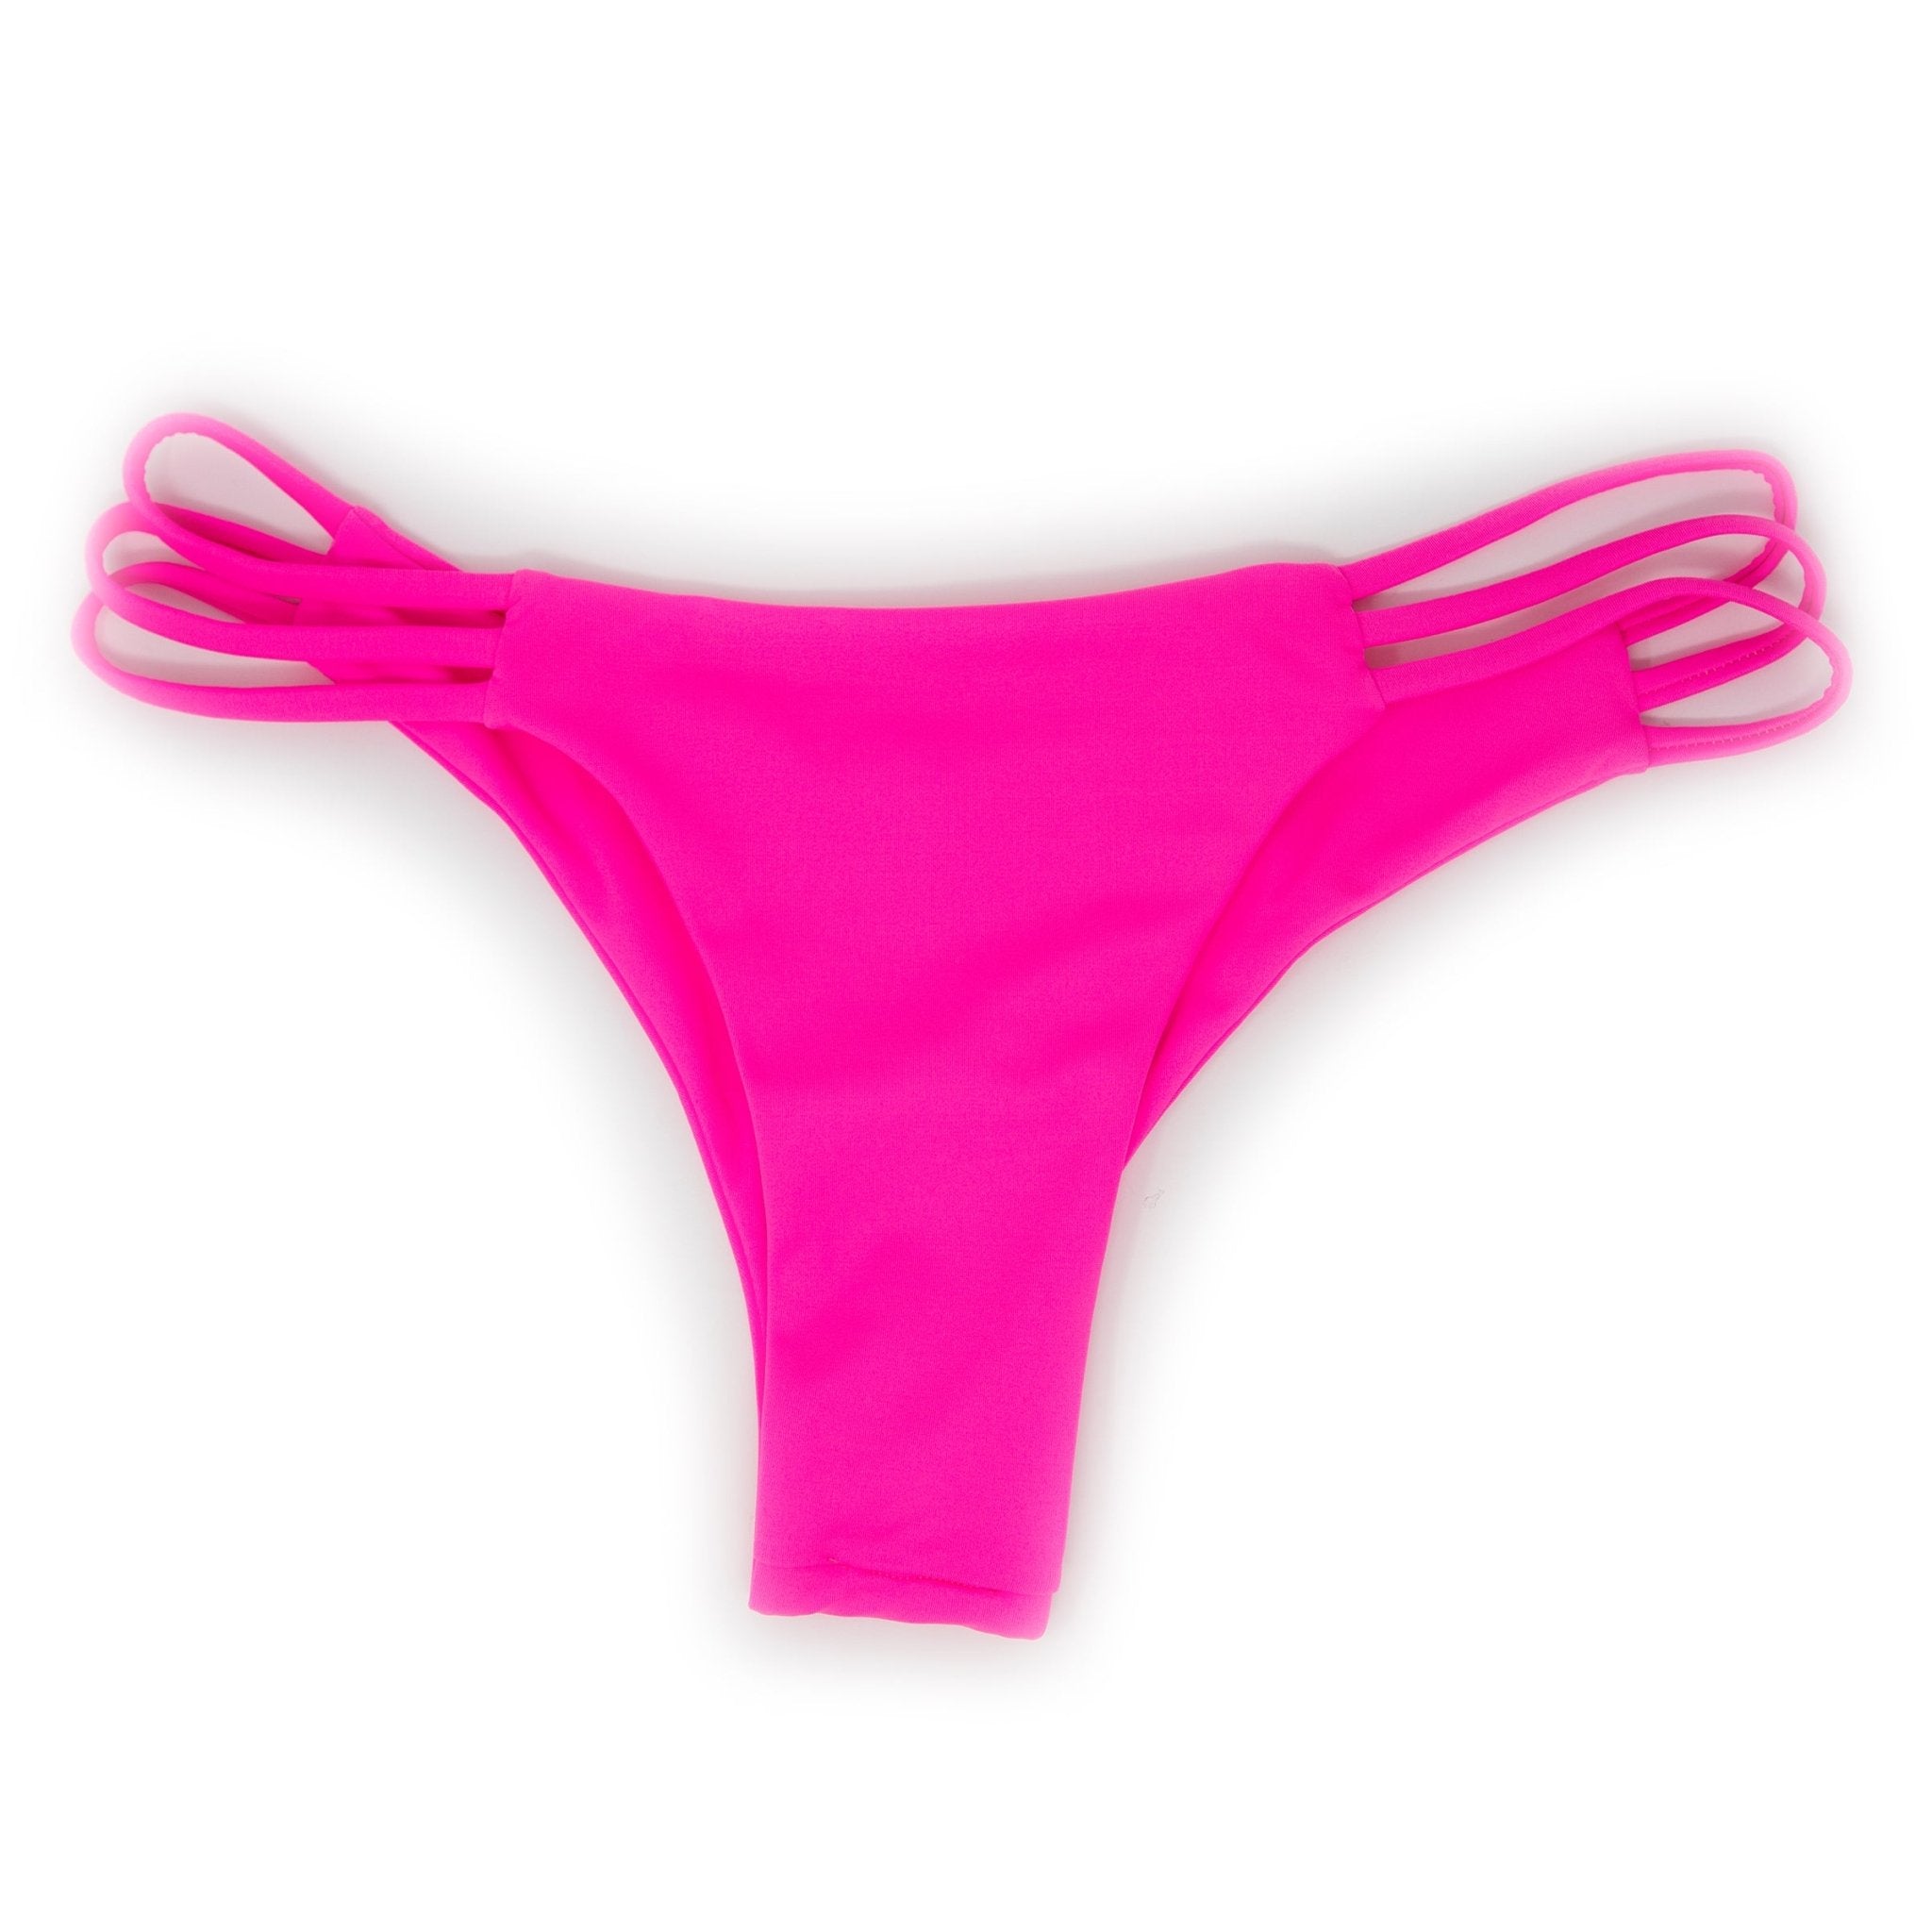 Seaweeds Famous Pink Strappy Cheeky Minimum Coverage Bottom - Destination PSP